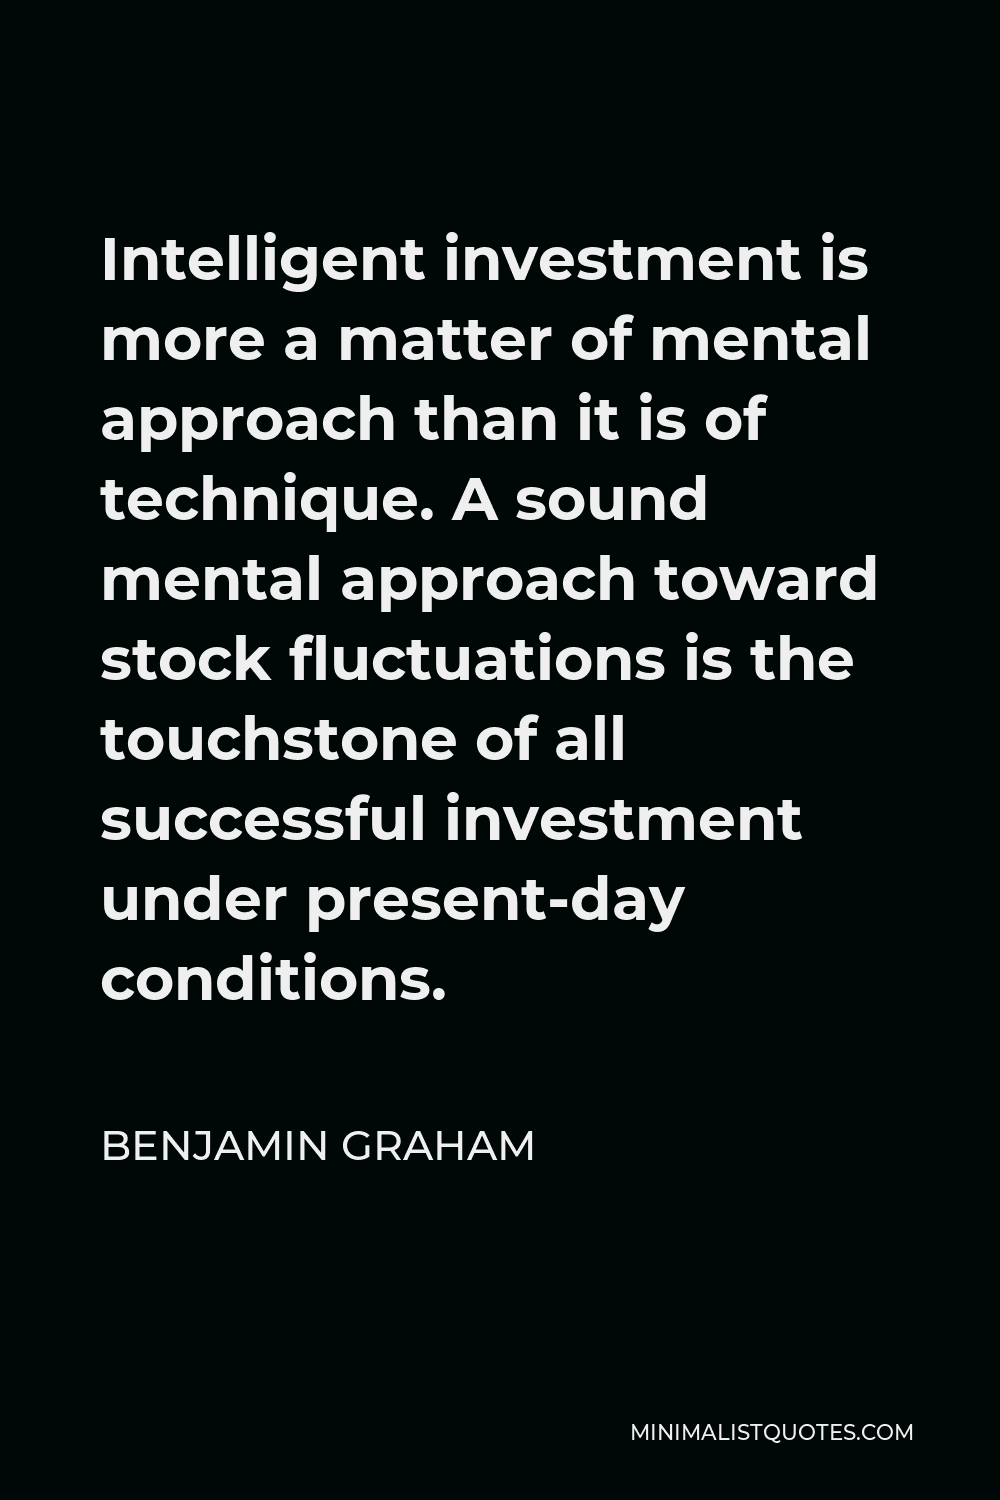 Benjamin Graham Quote - Intelligent investment is more a matter of mental approach than it is of technique. A sound mental approach toward stock fluctuations is the touchstone of all successful investment under present-day conditions.